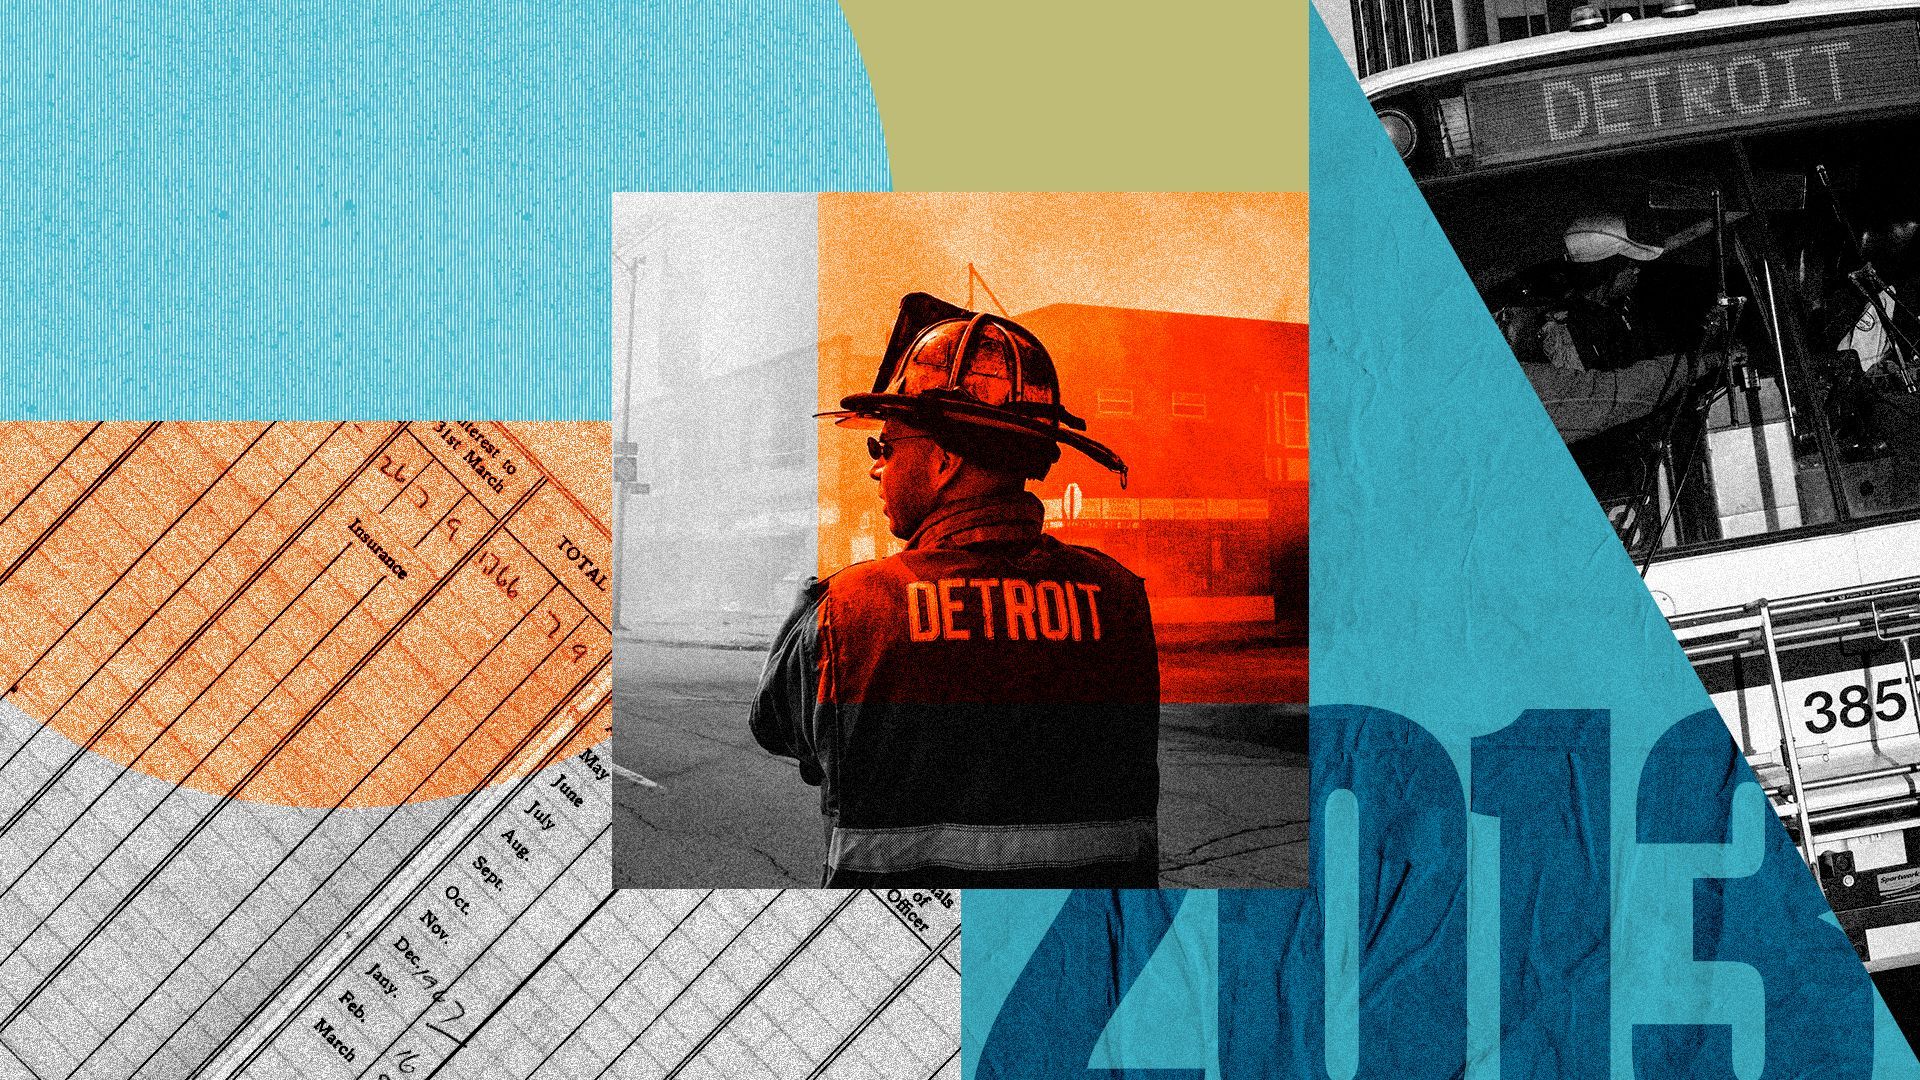 Photo illustration of the back of a Detroit firefighter with a ledger, a Detroit bus, and "2013" within geometric shapes.